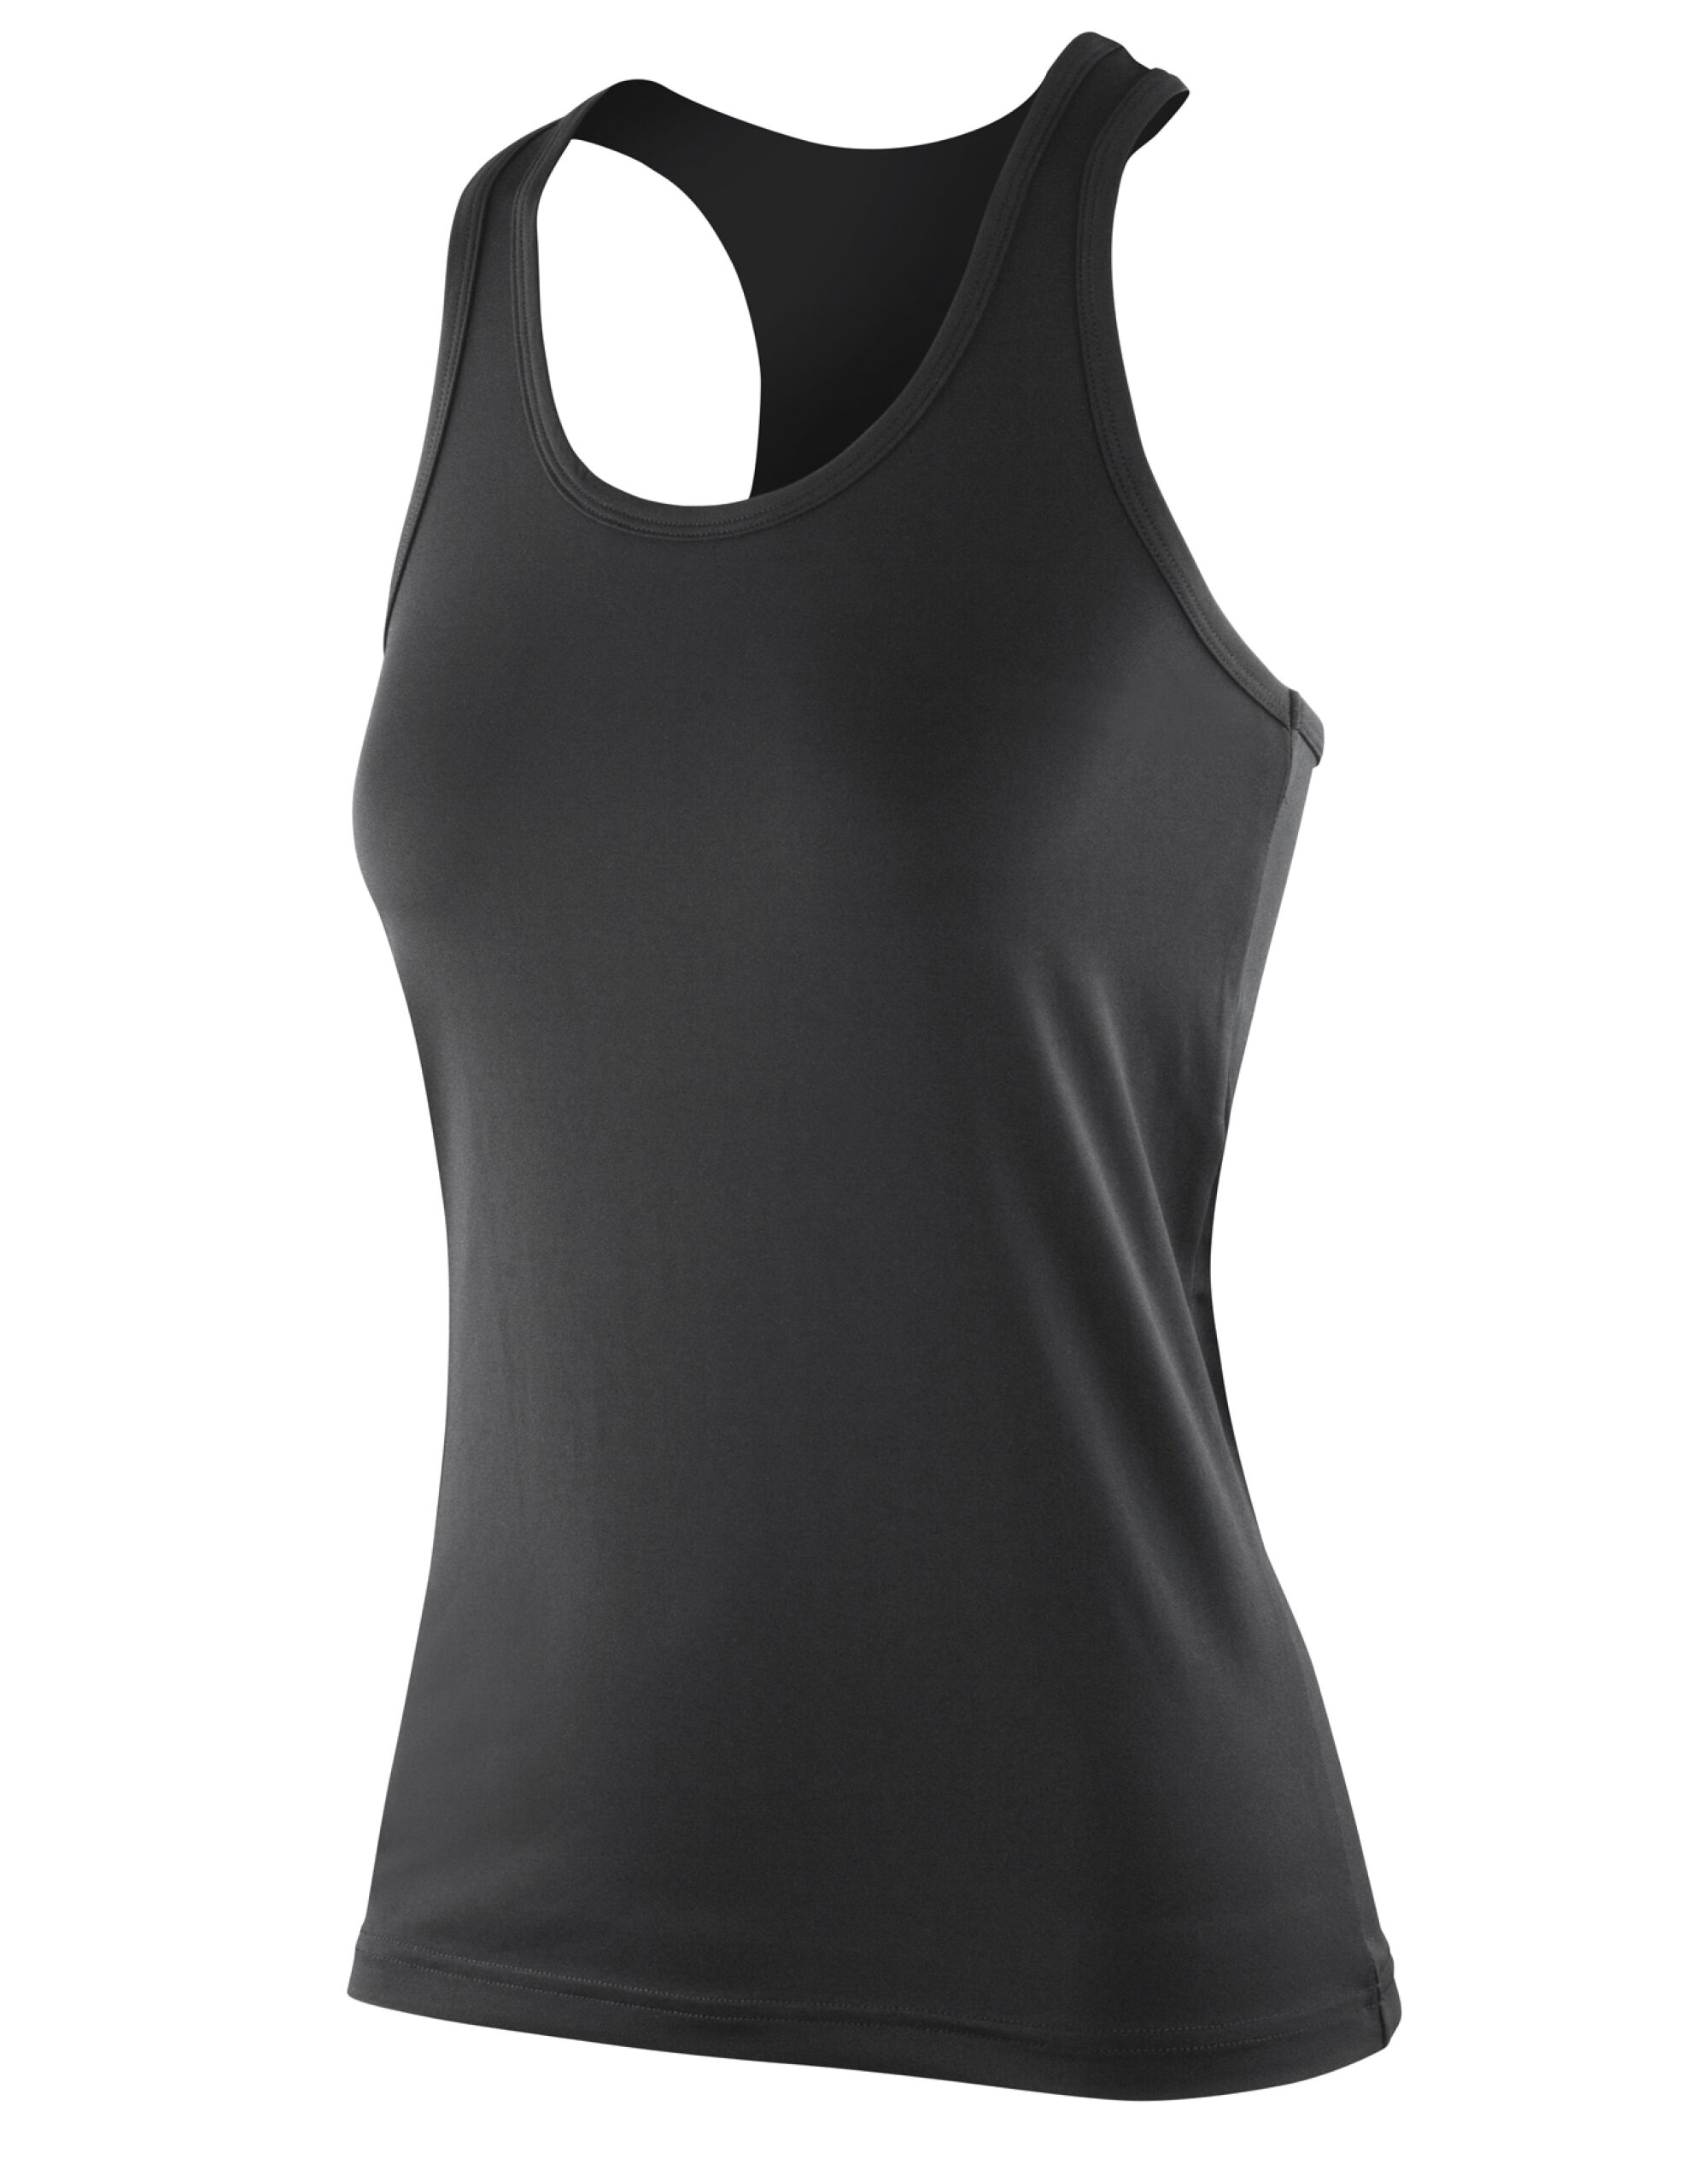 Picture of Impact Women's Softex Fitness Top